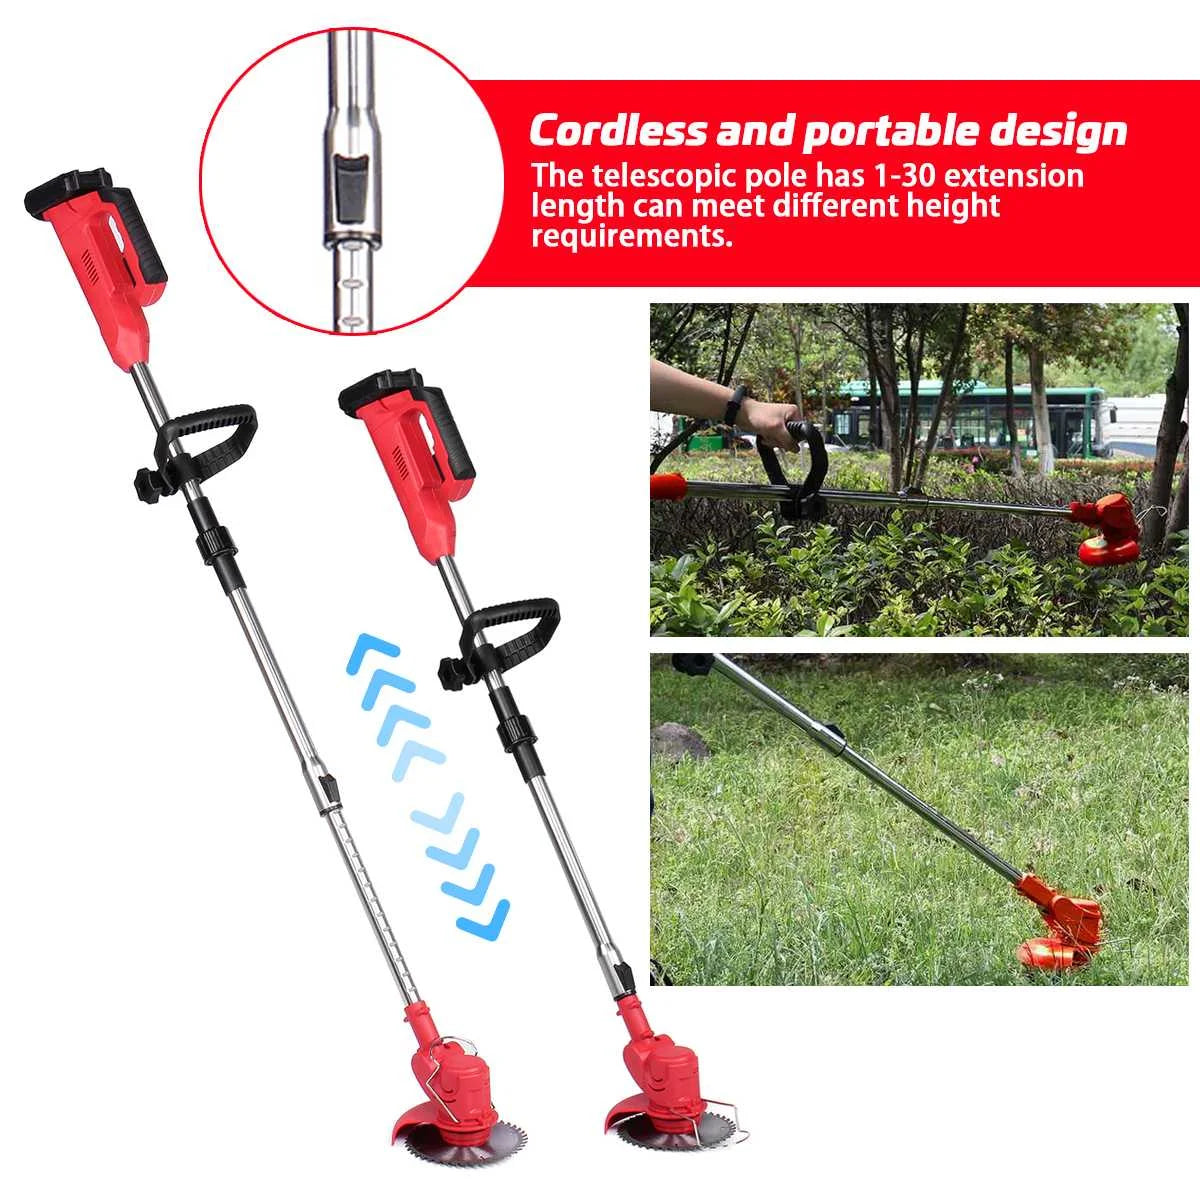 24V 2000W 35000RPM Cordless Lawn Mower Electric Grass Trimmer Collapsible Length Adjustable Mower Garden Pruning Power Tool